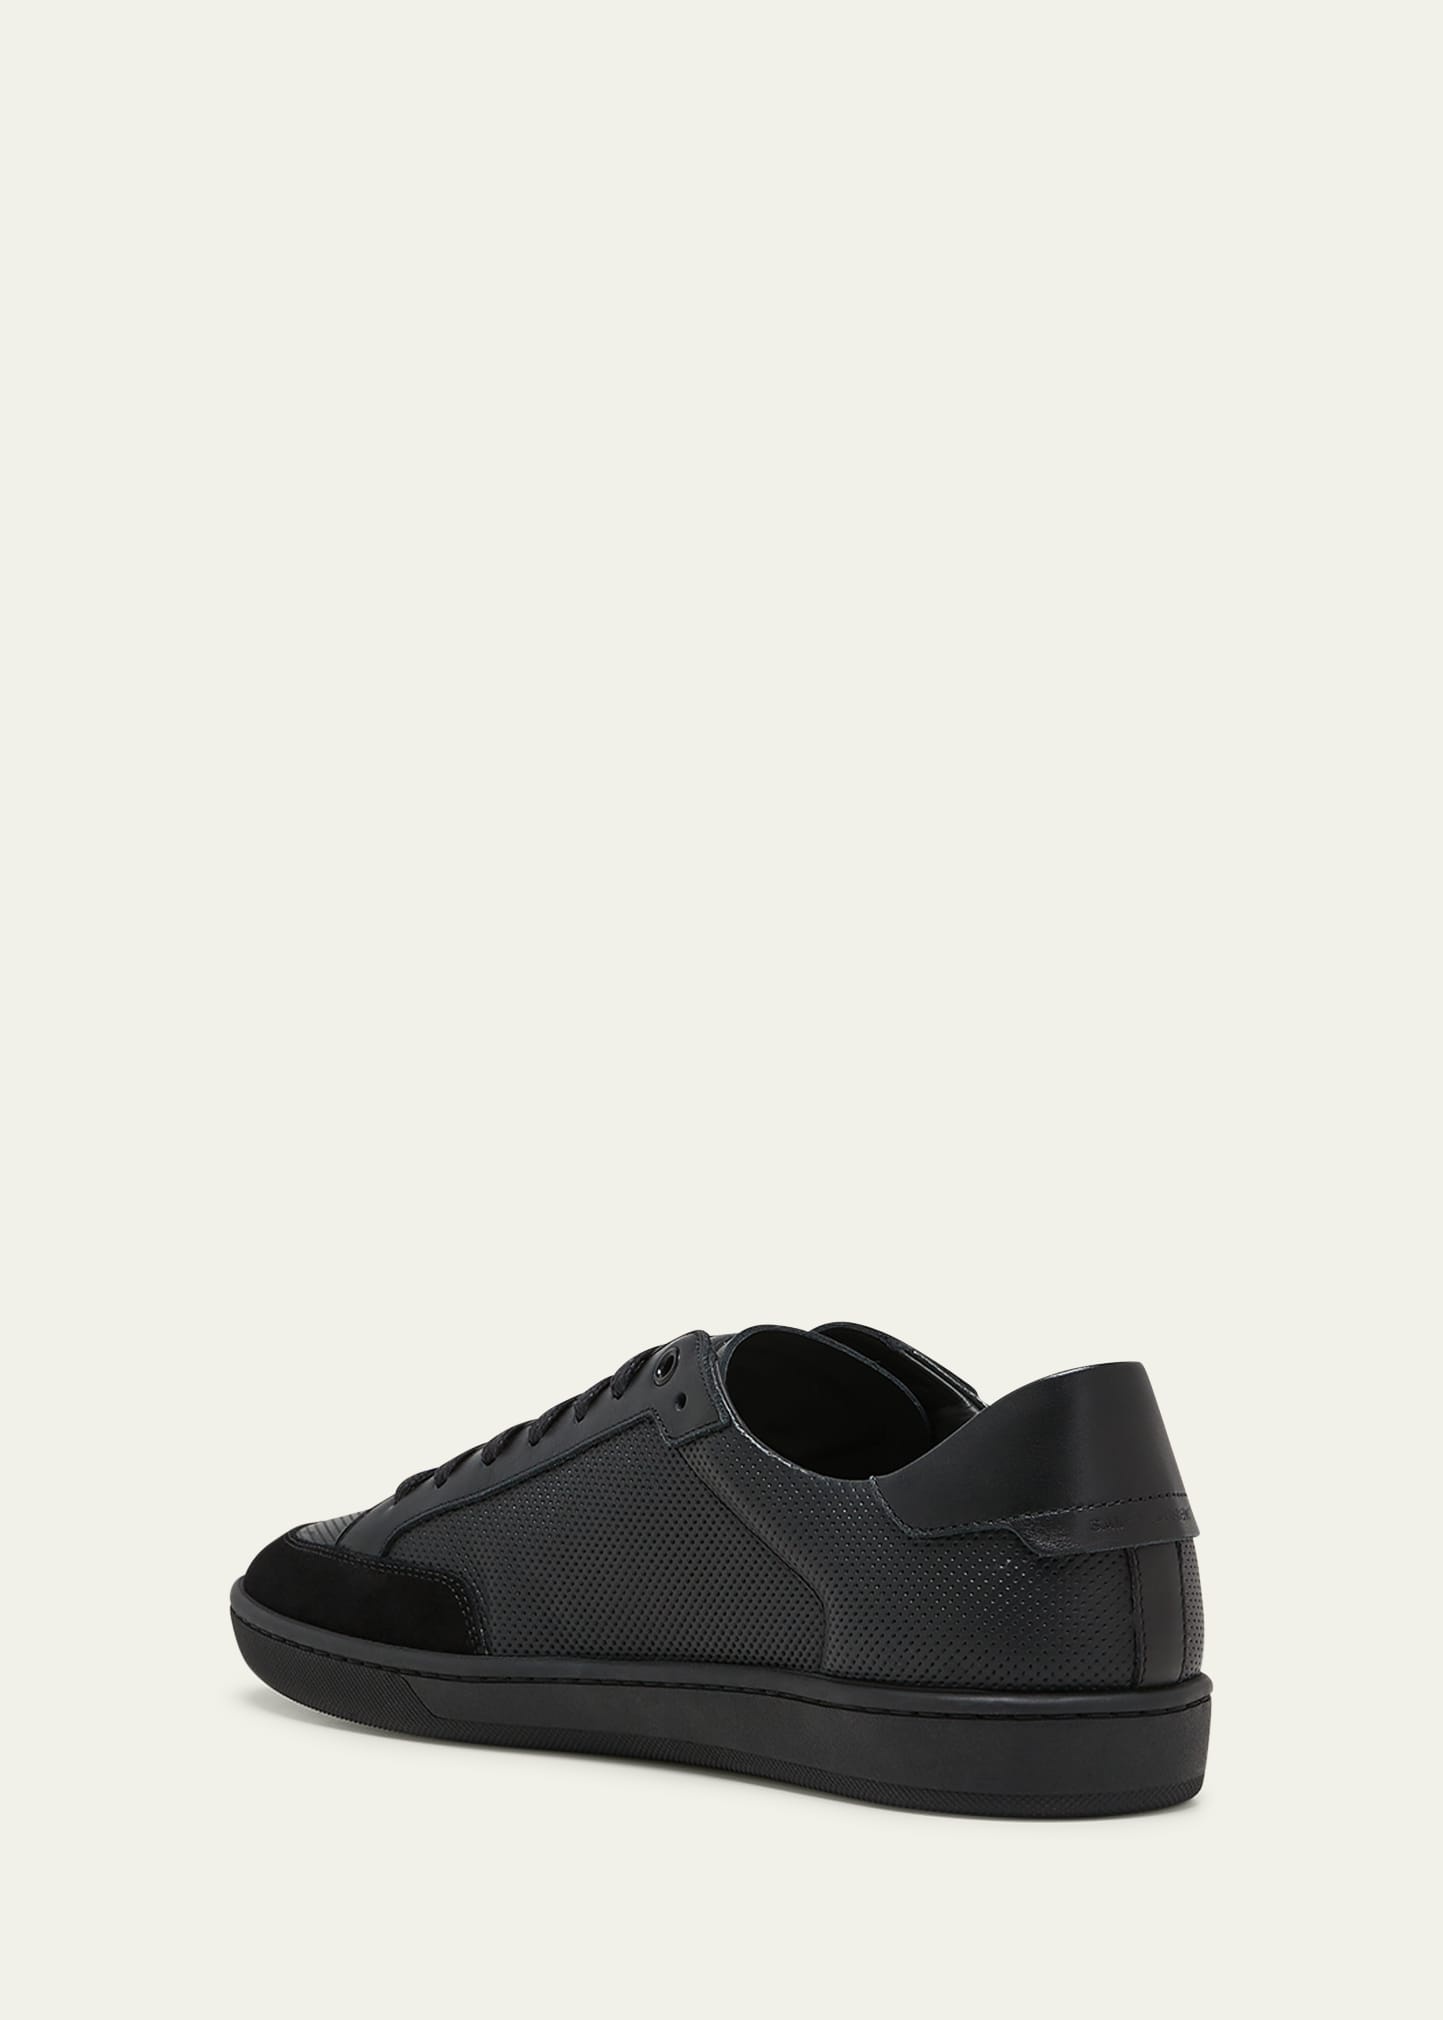 Men's Court Classic Perforated Leather Sneakers - 4